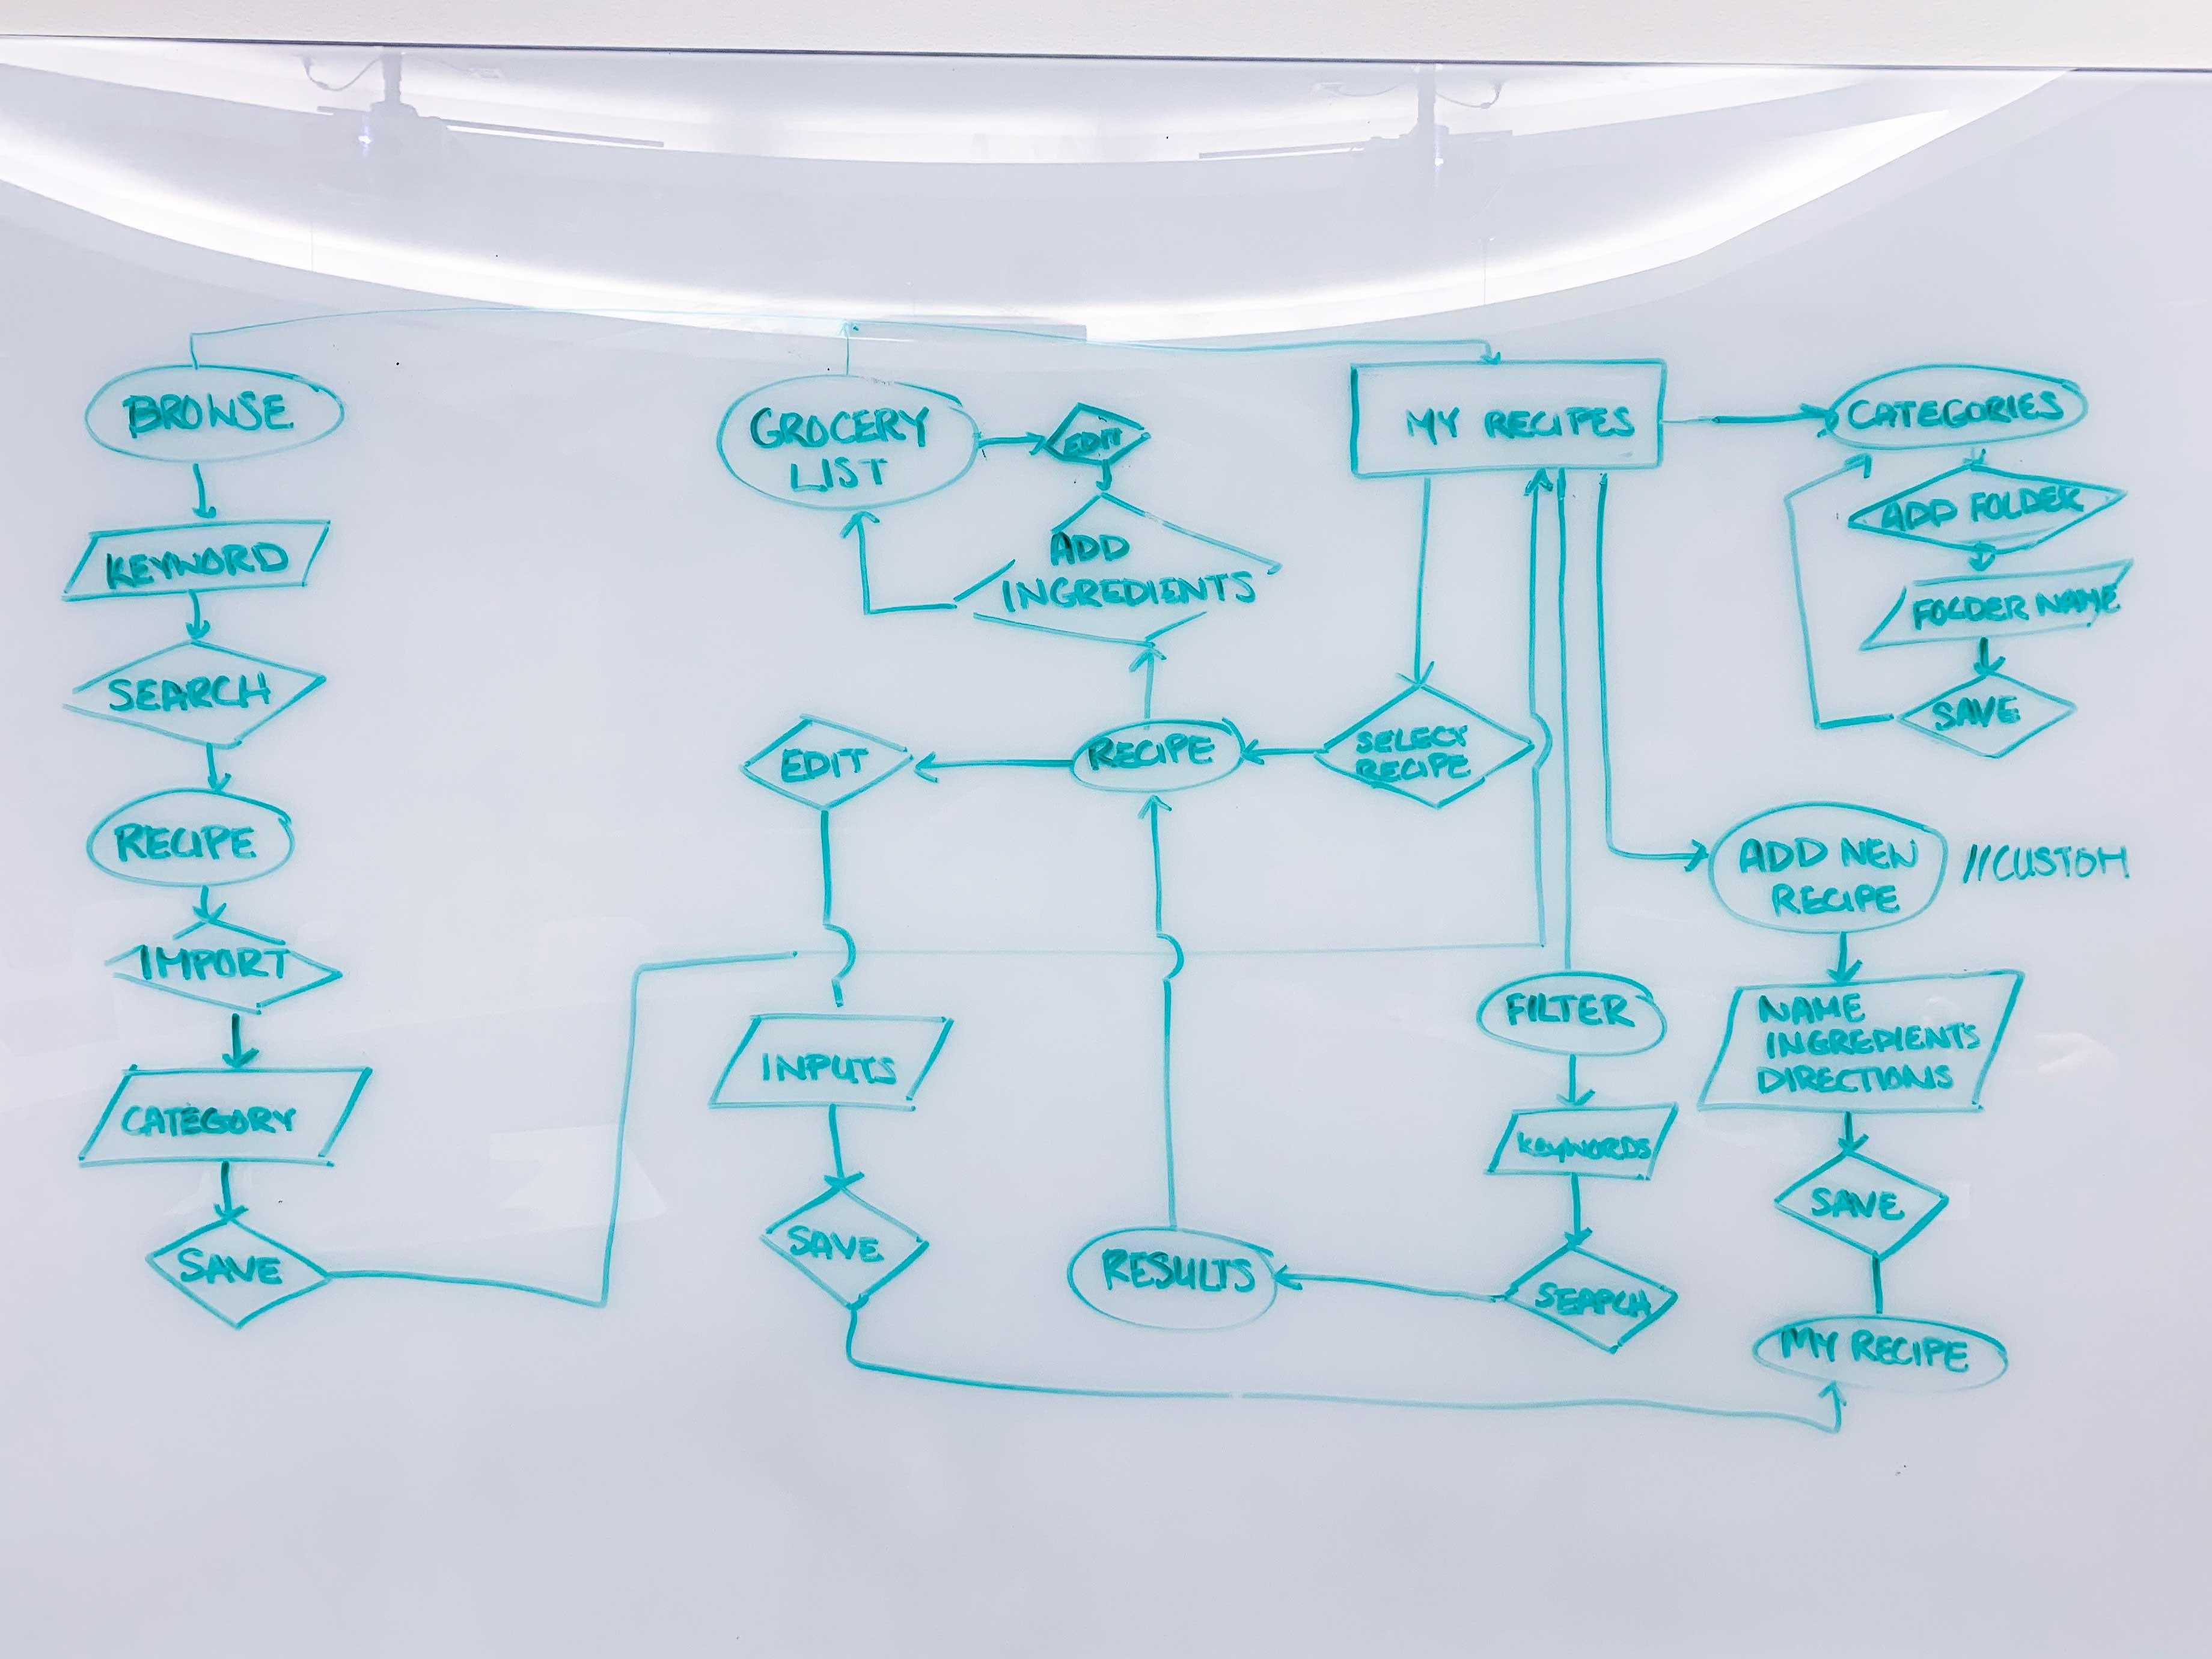 A sketch of our user flow